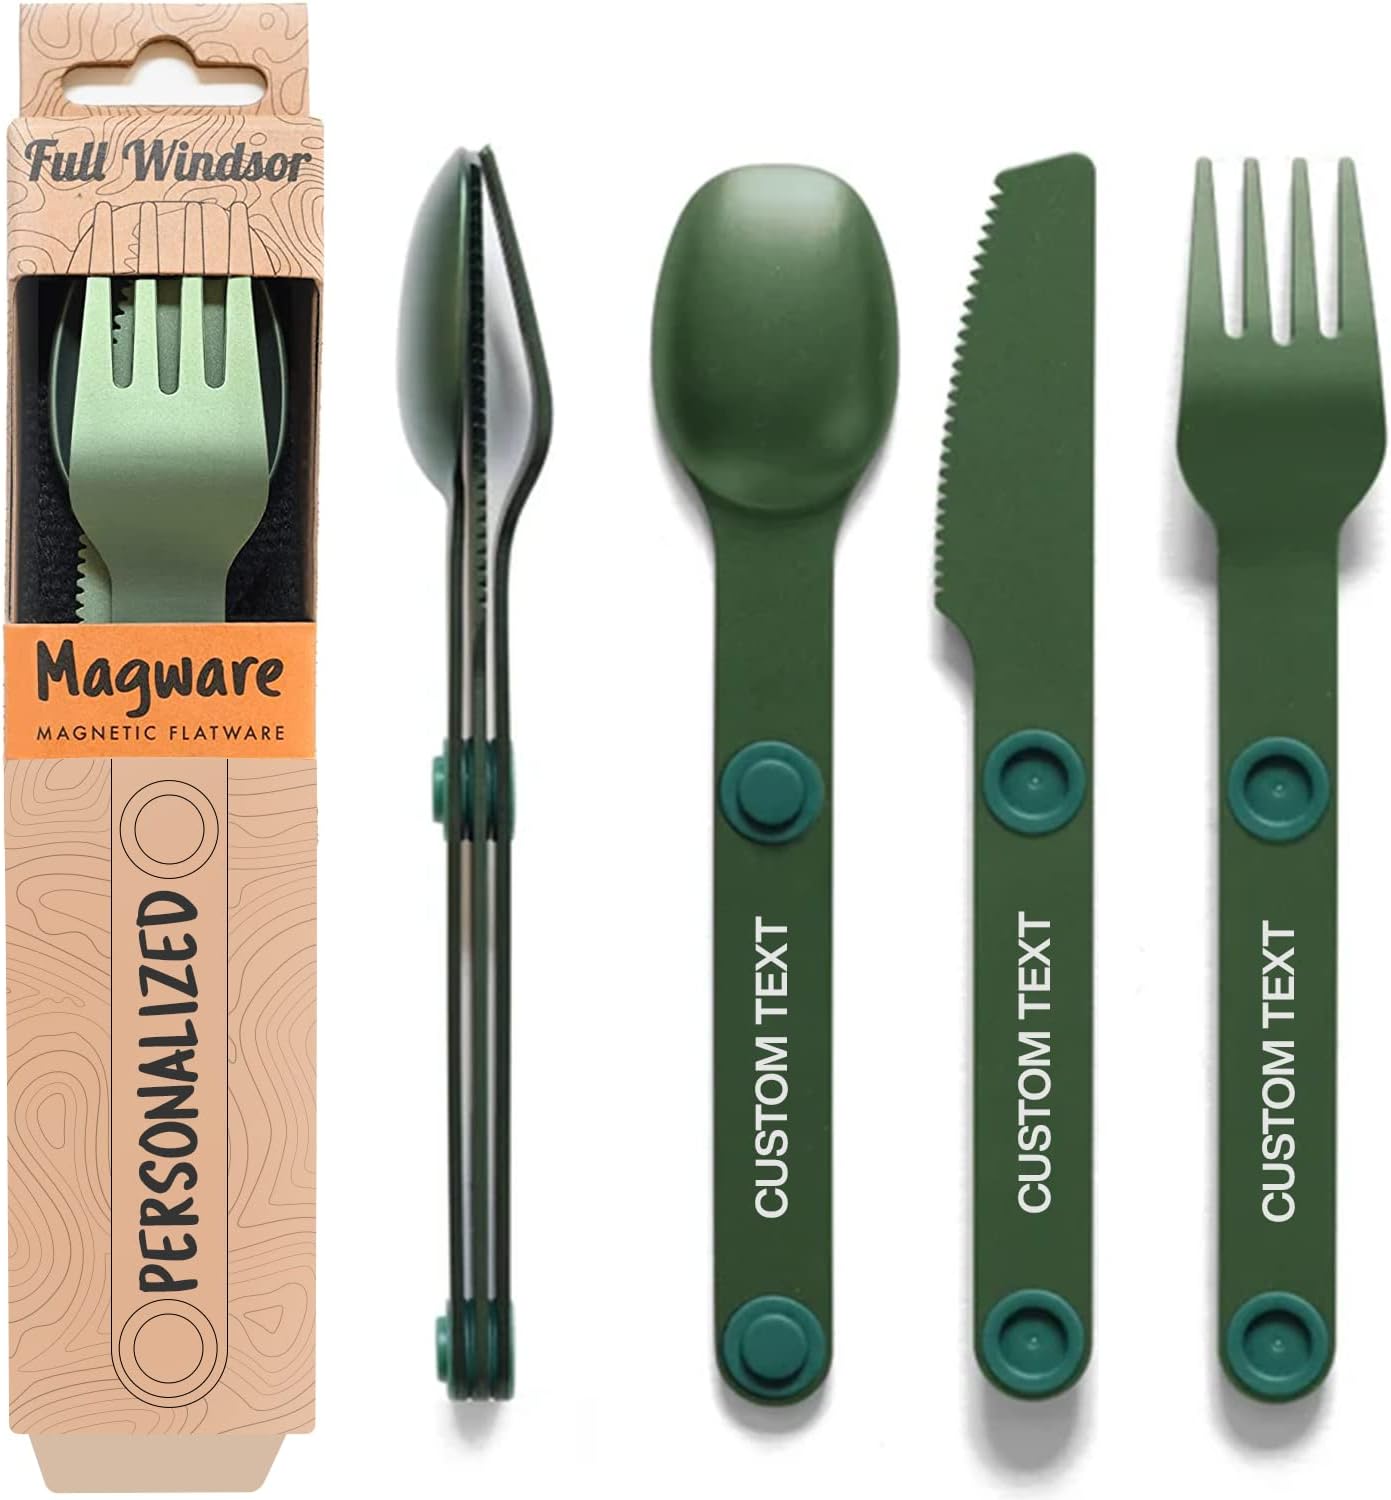 Personalized MAGWARE Magnetic Camping Cutlery Utensils Set - Custom Engraved Portable & Reusable Metal Travel Flatware w/a Case for the Outdoors, Office & Kid\\\'s Lunchbox | Knife, Fork, Spoon (3 PCS)